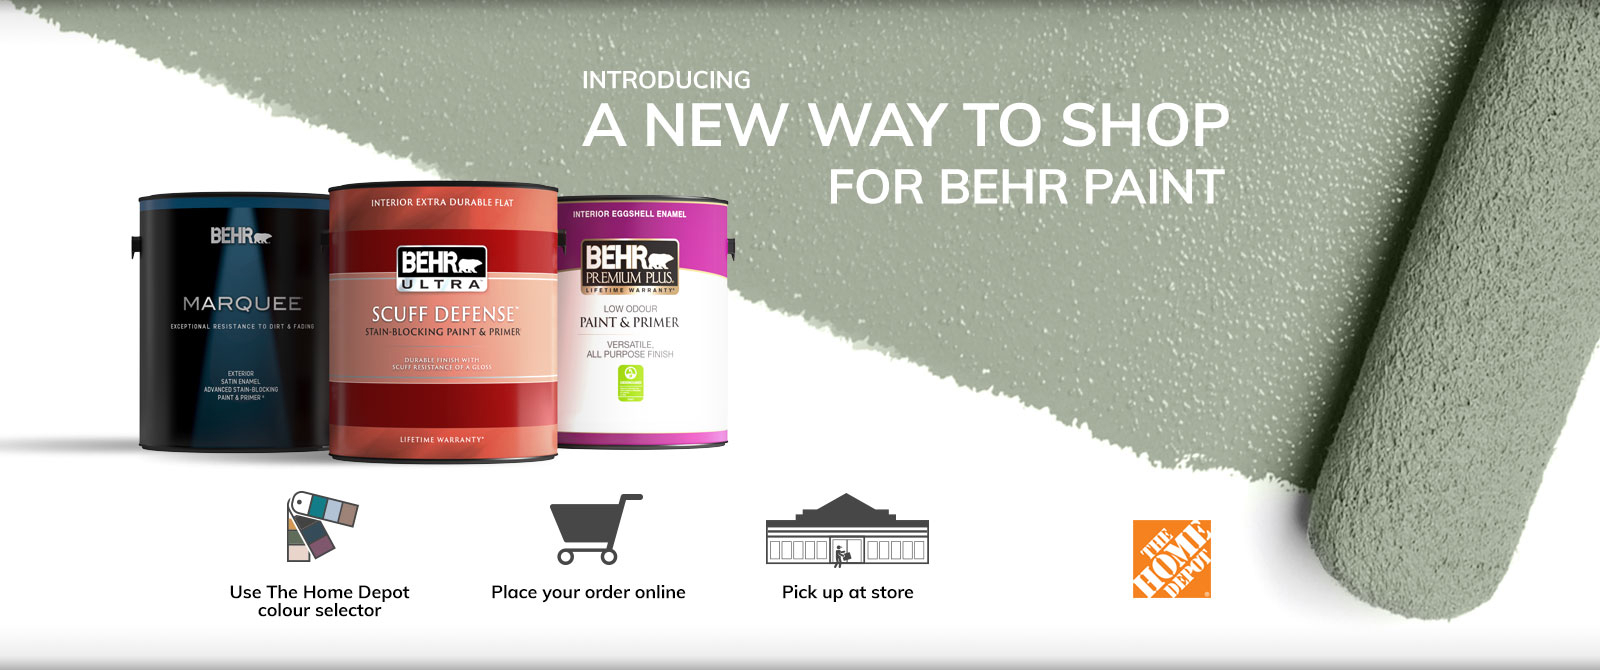 A new way to shop for BEHR Paint